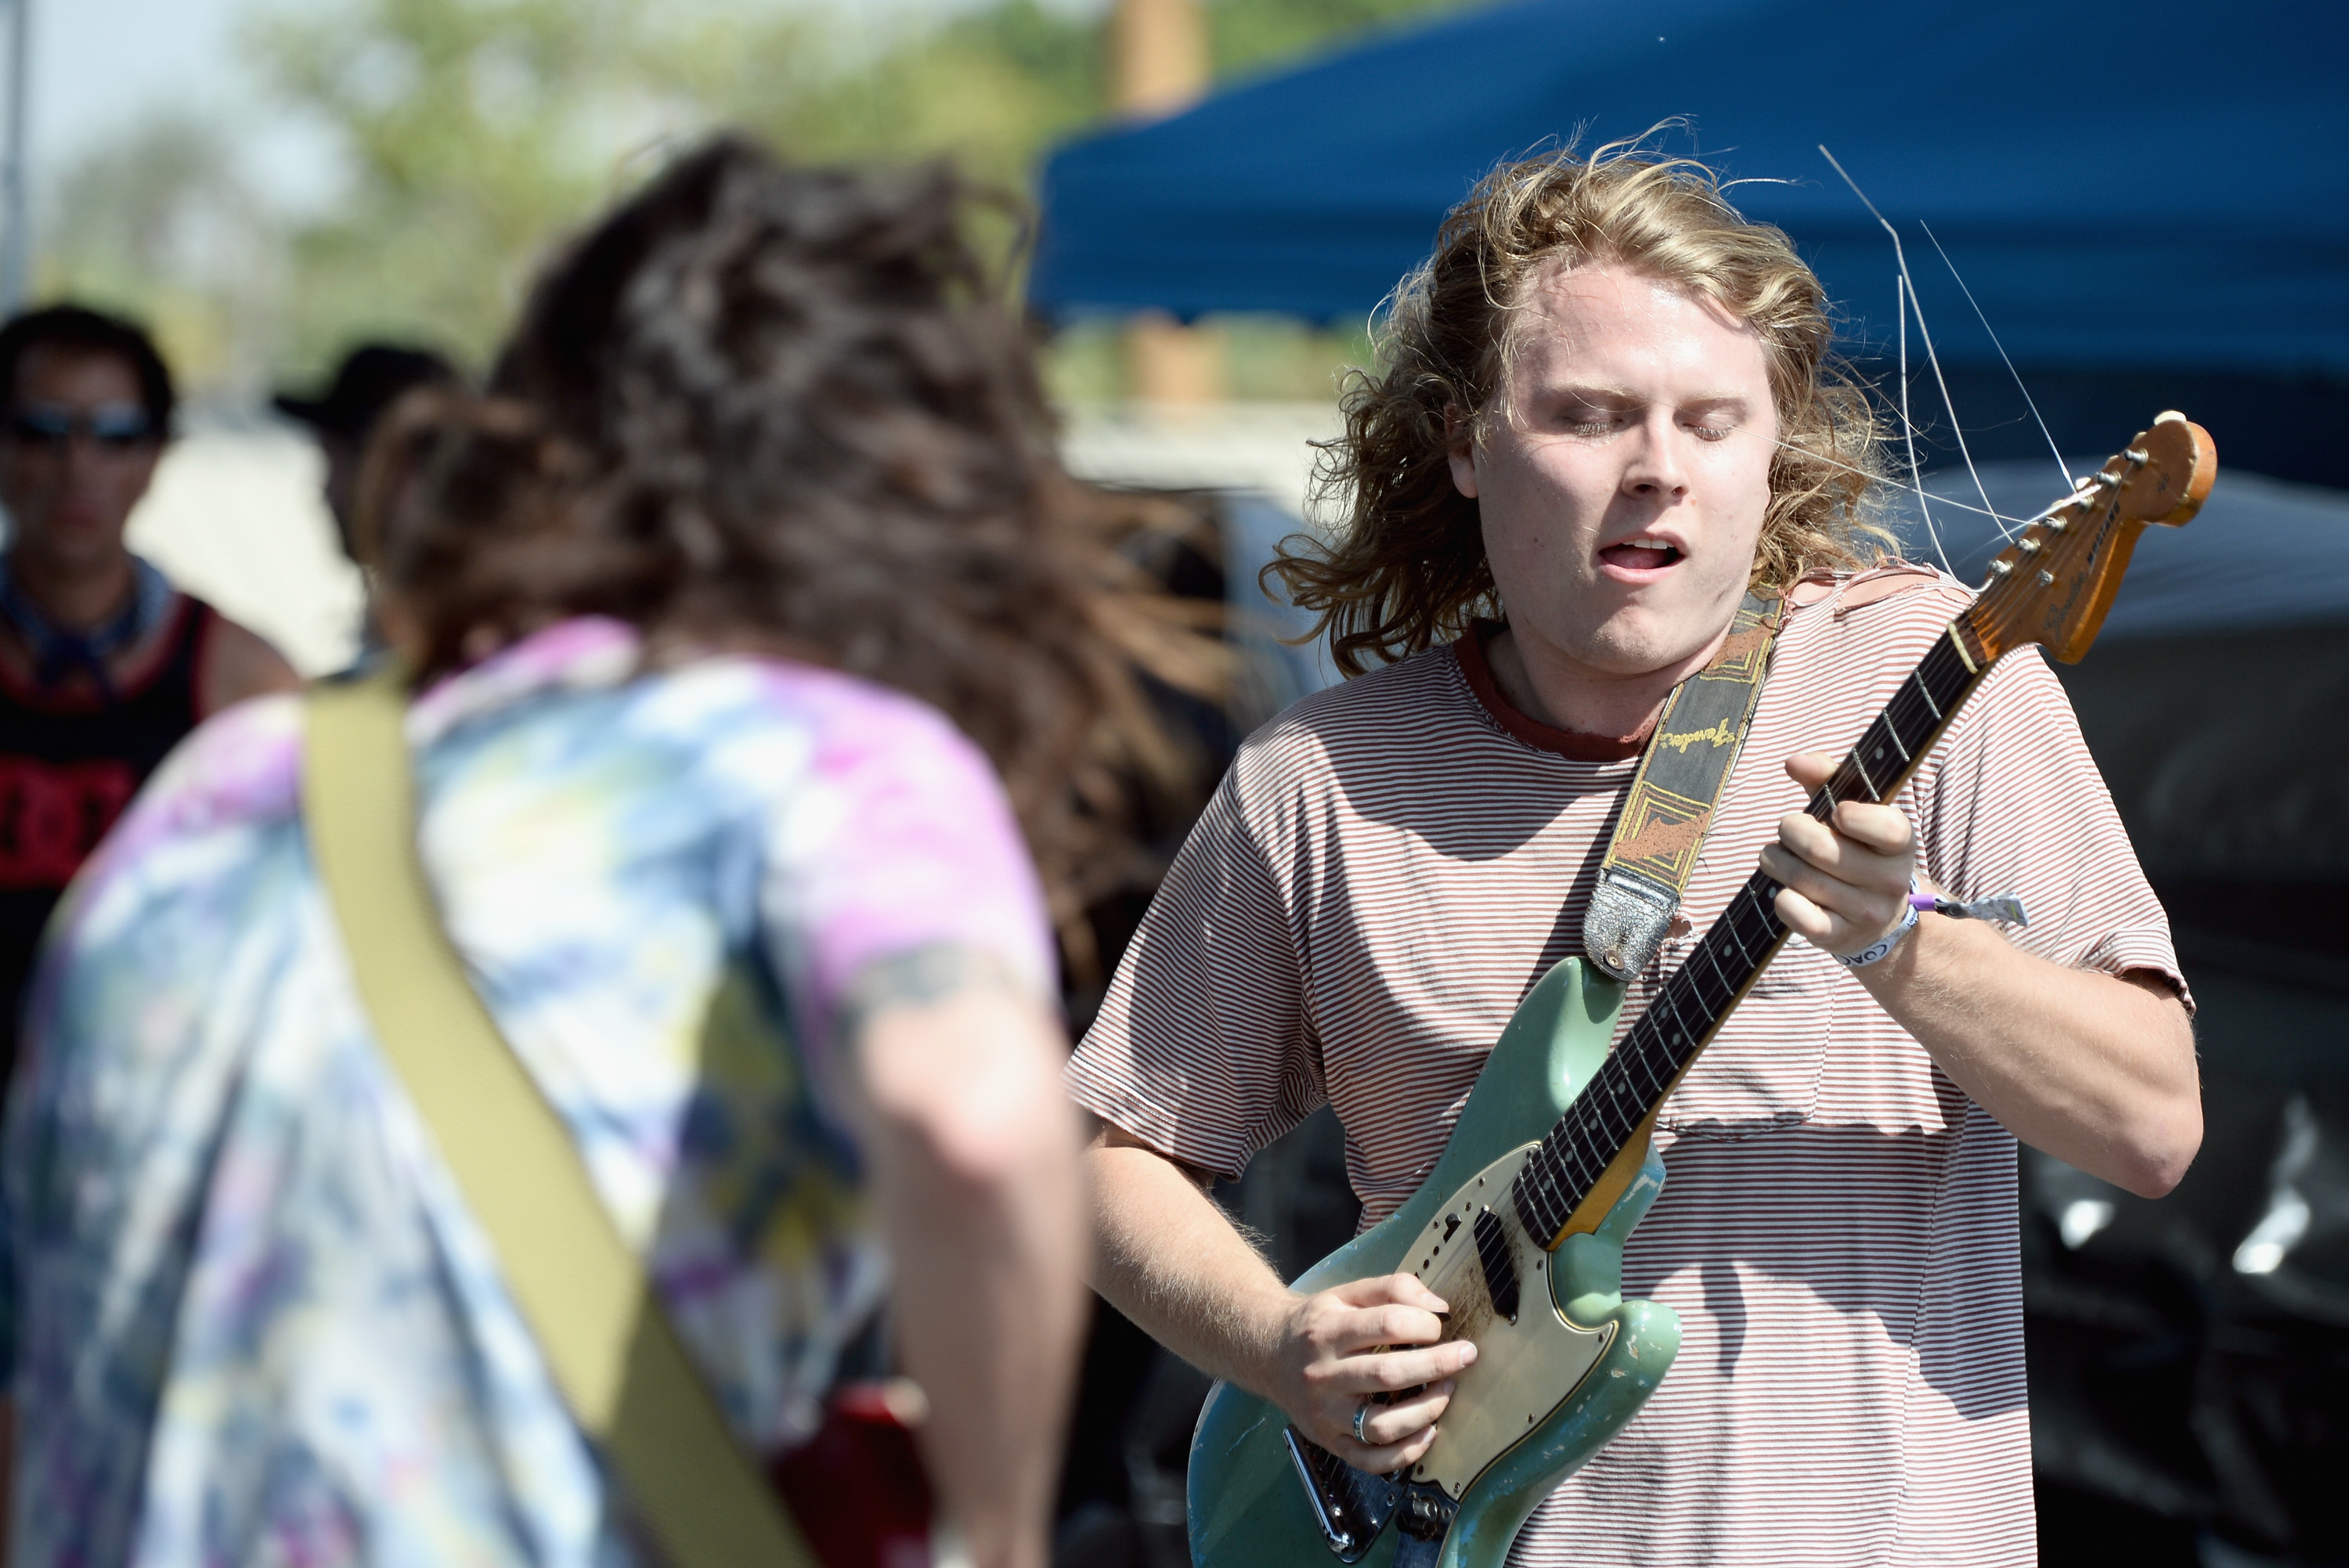 Ty Segall at 2014 Coachella Valley Music and Arts Festival - Day 2